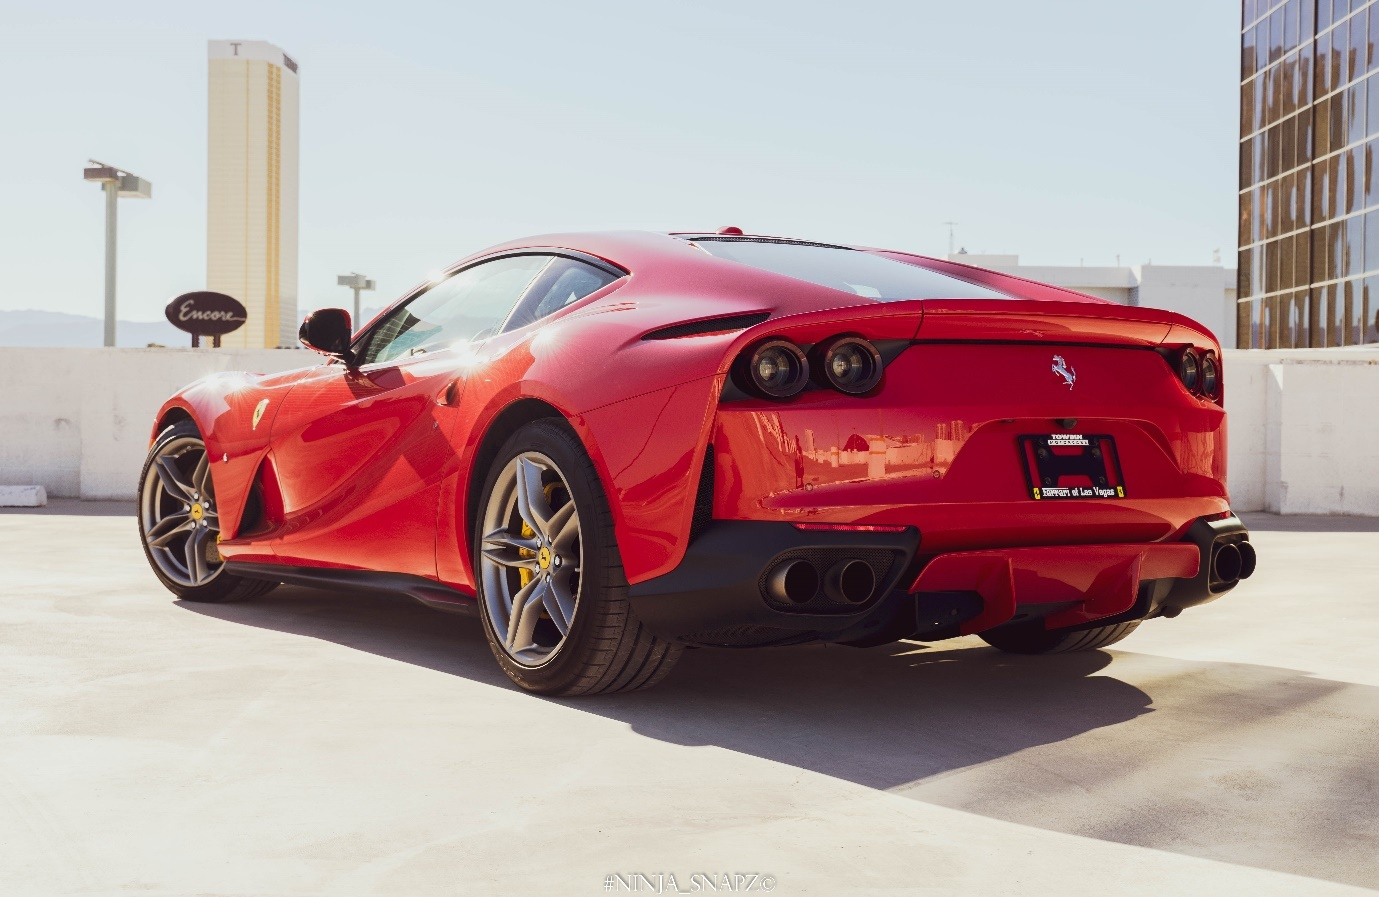 The Ferrari 812 Superfast is parked on the pavement.